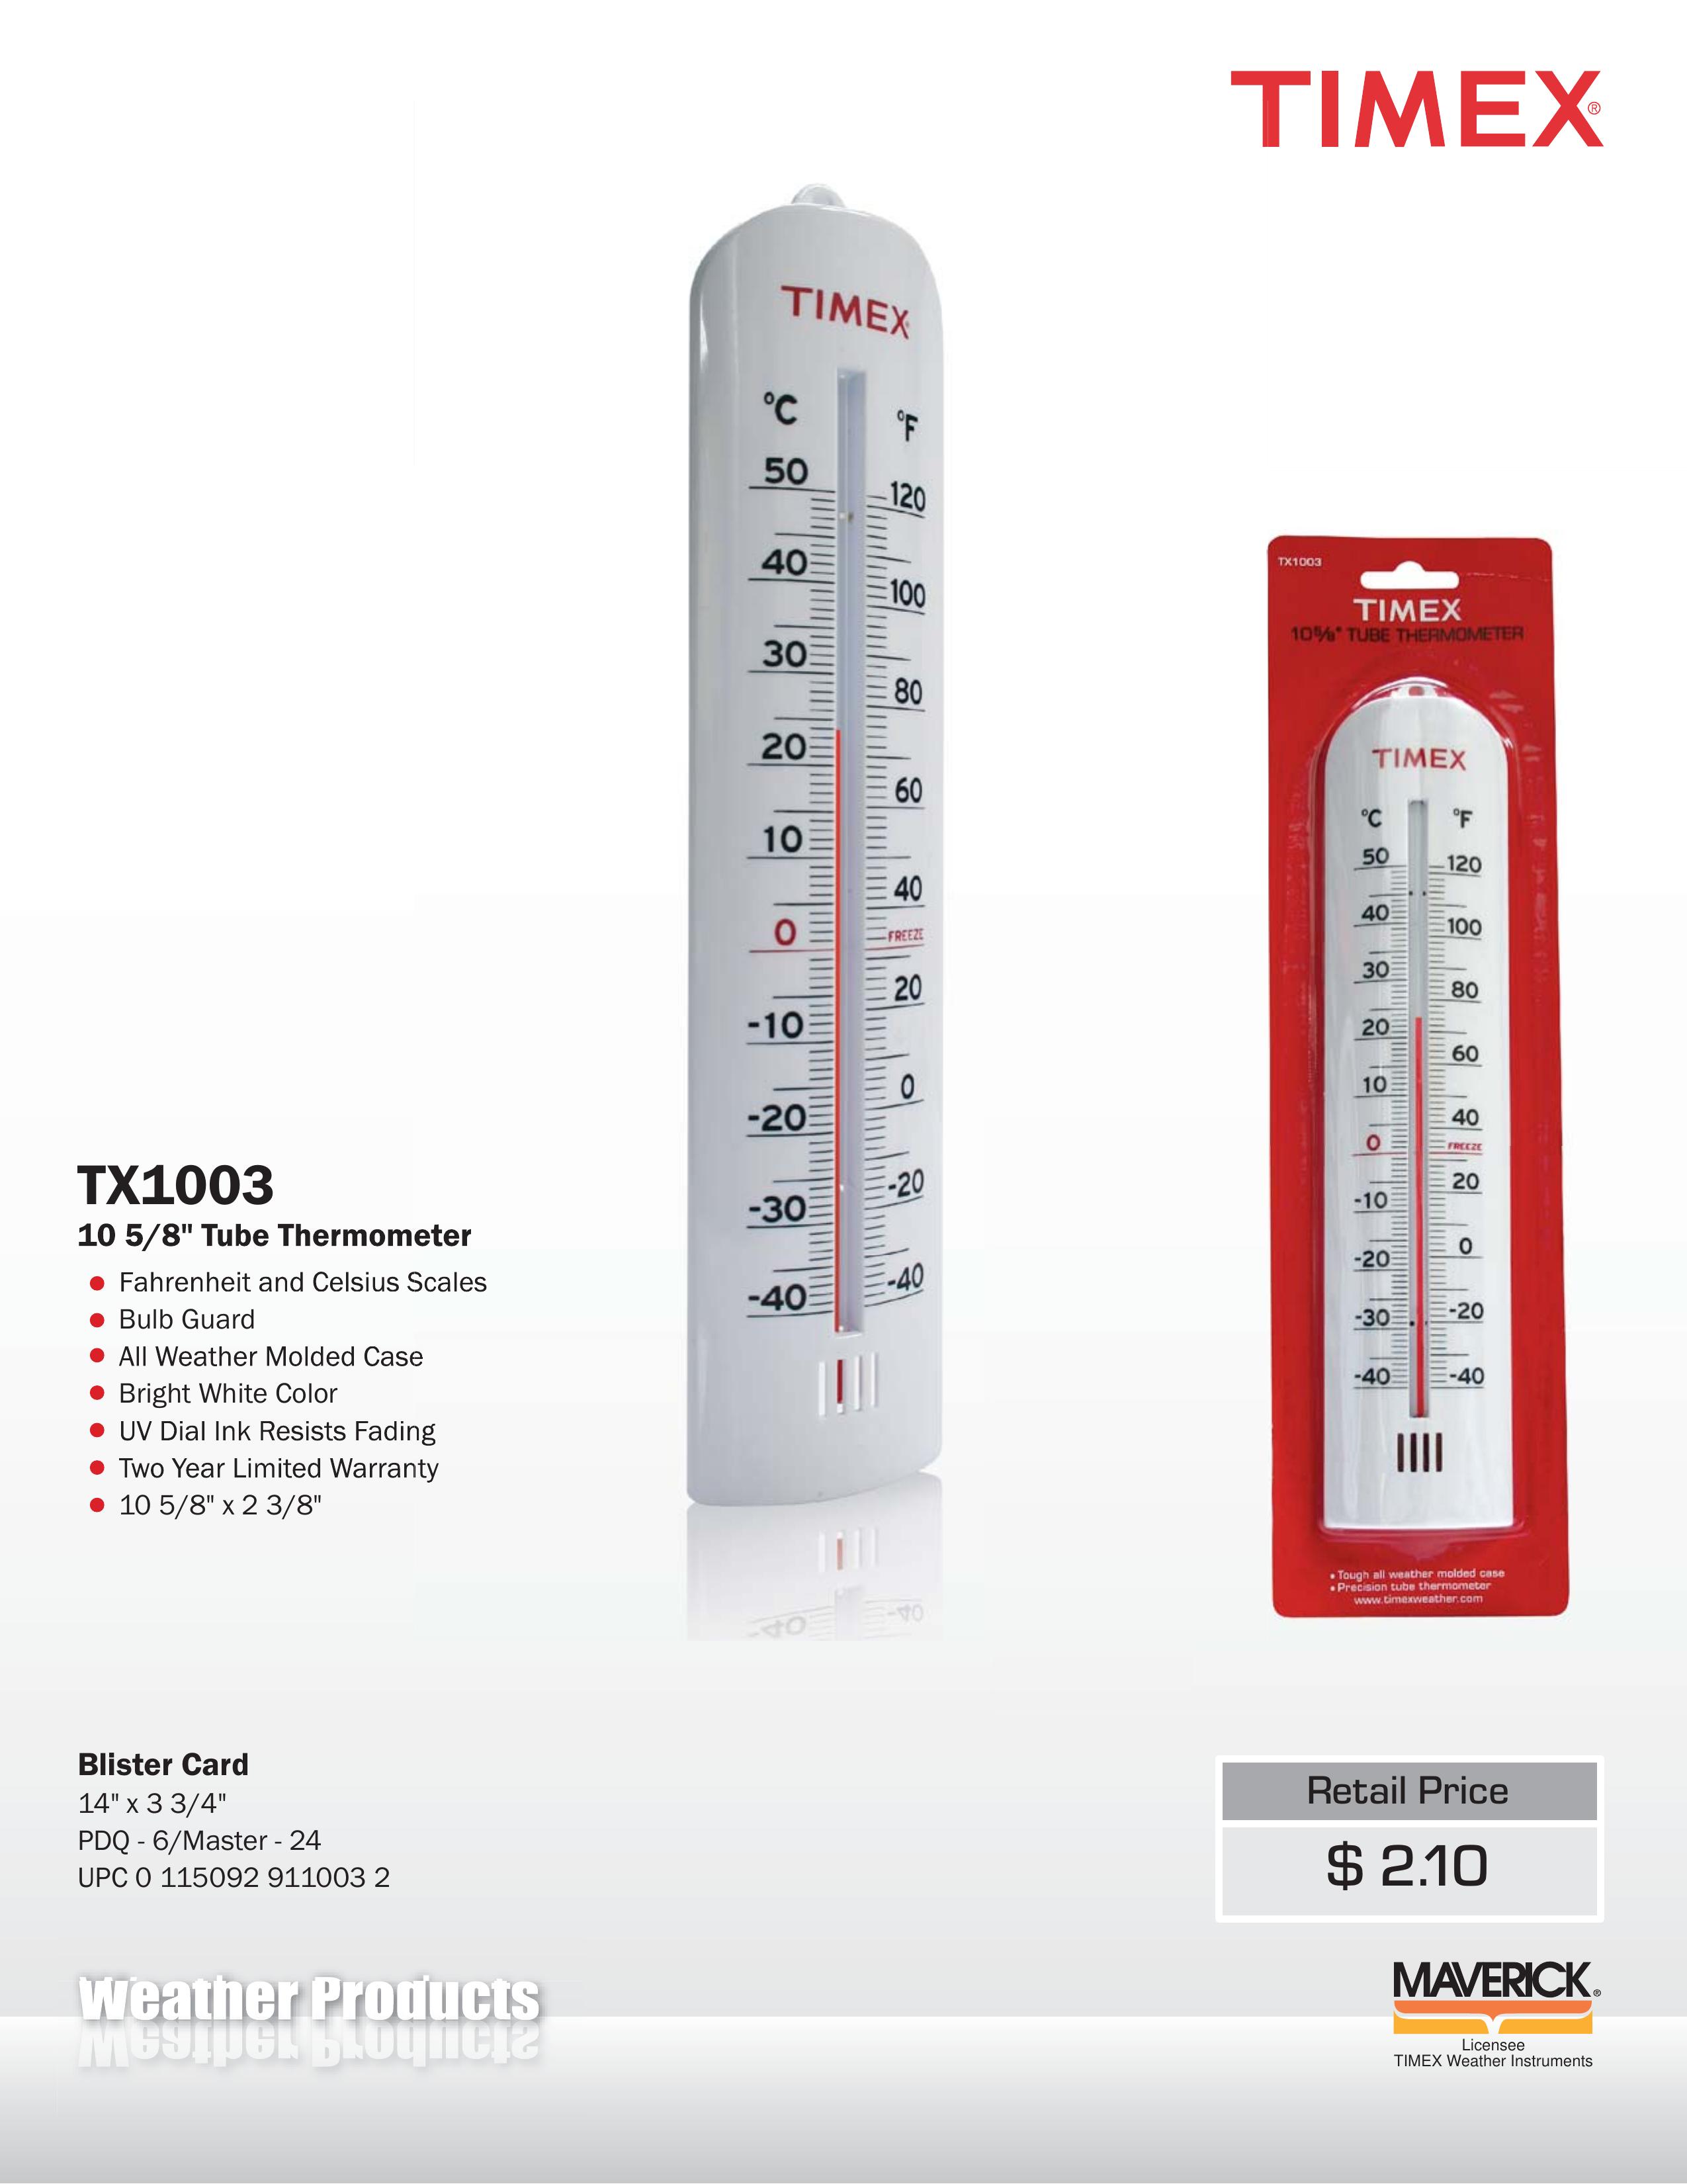 TIMEX Weather Products TX-1003 Thermometer User Manual